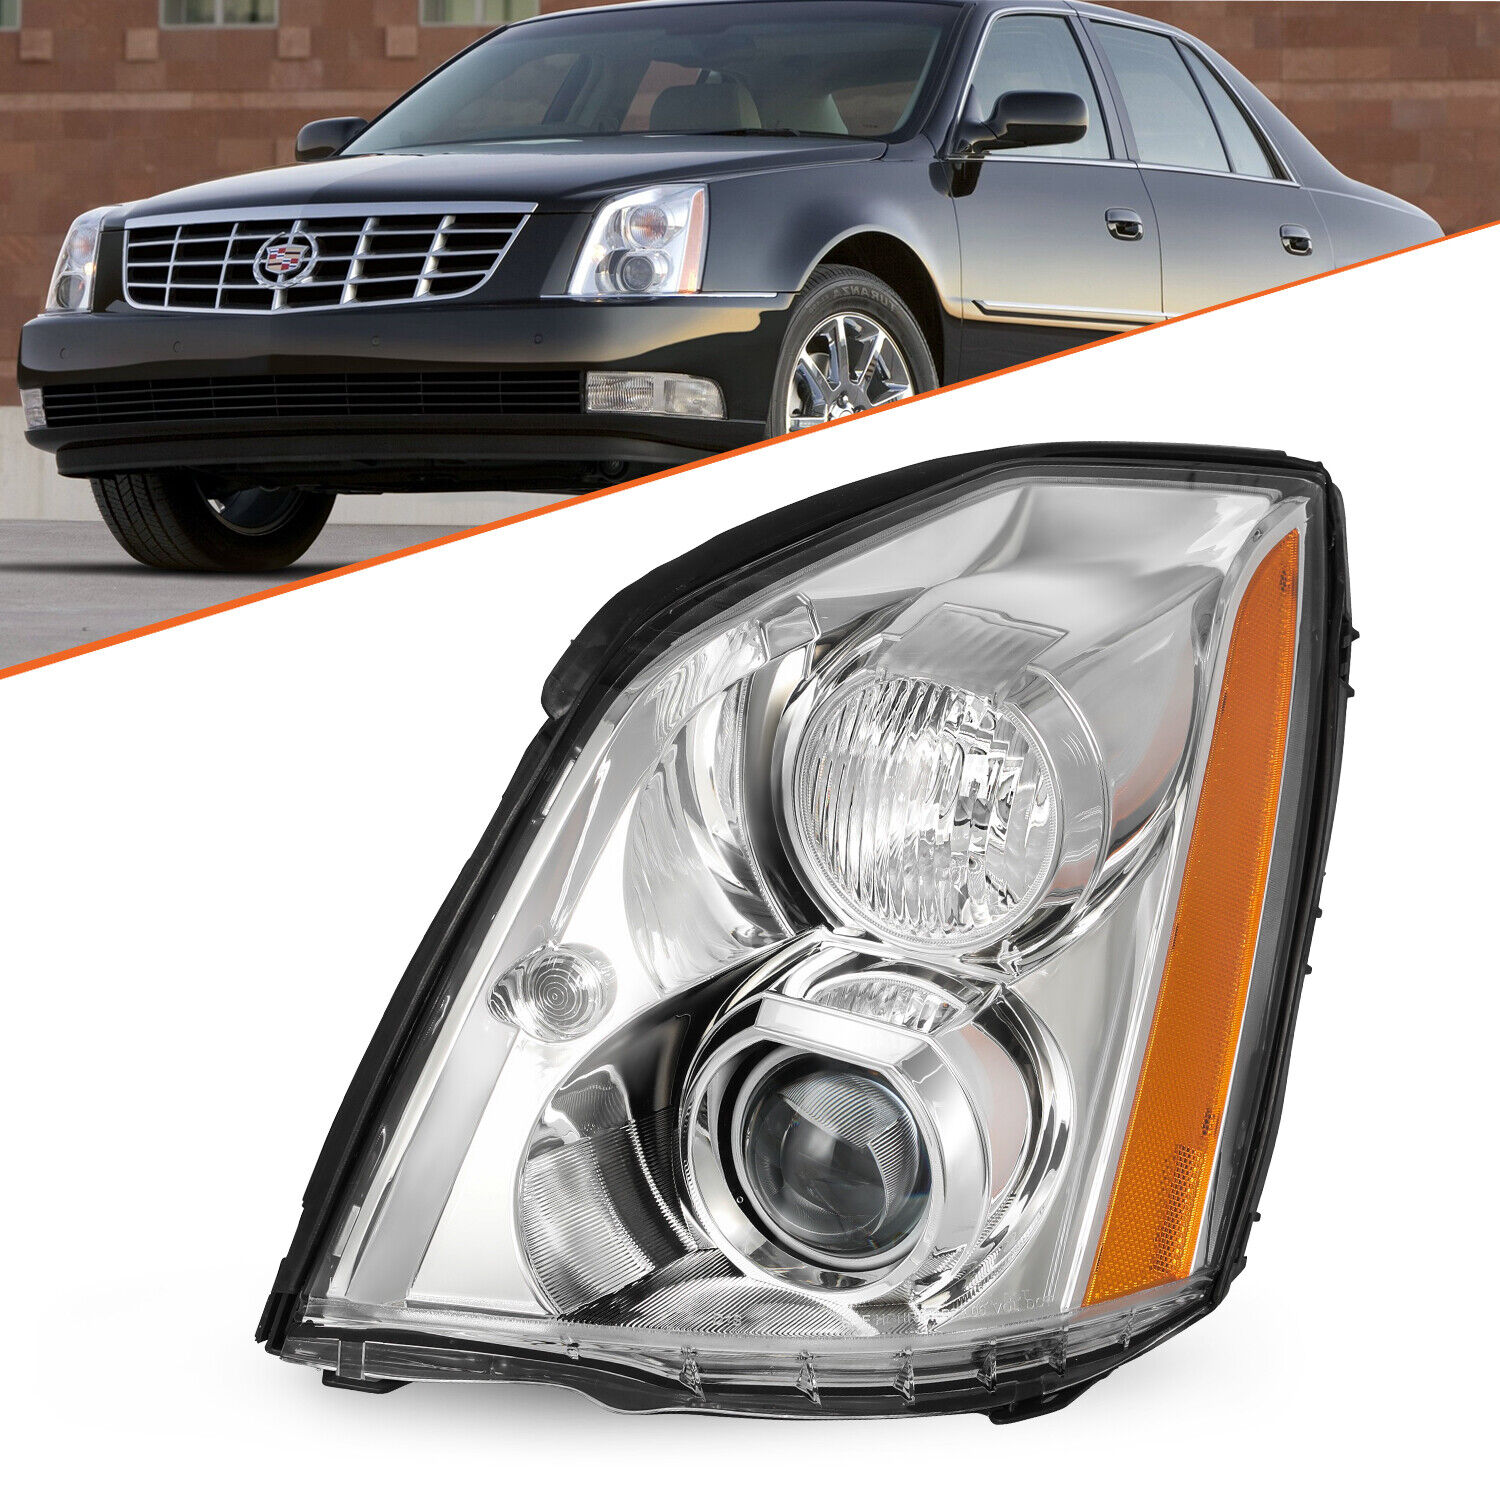 HID/Xenon Projector Headlight Driver Left Side For 2006-2011 Cadillac DTS LH